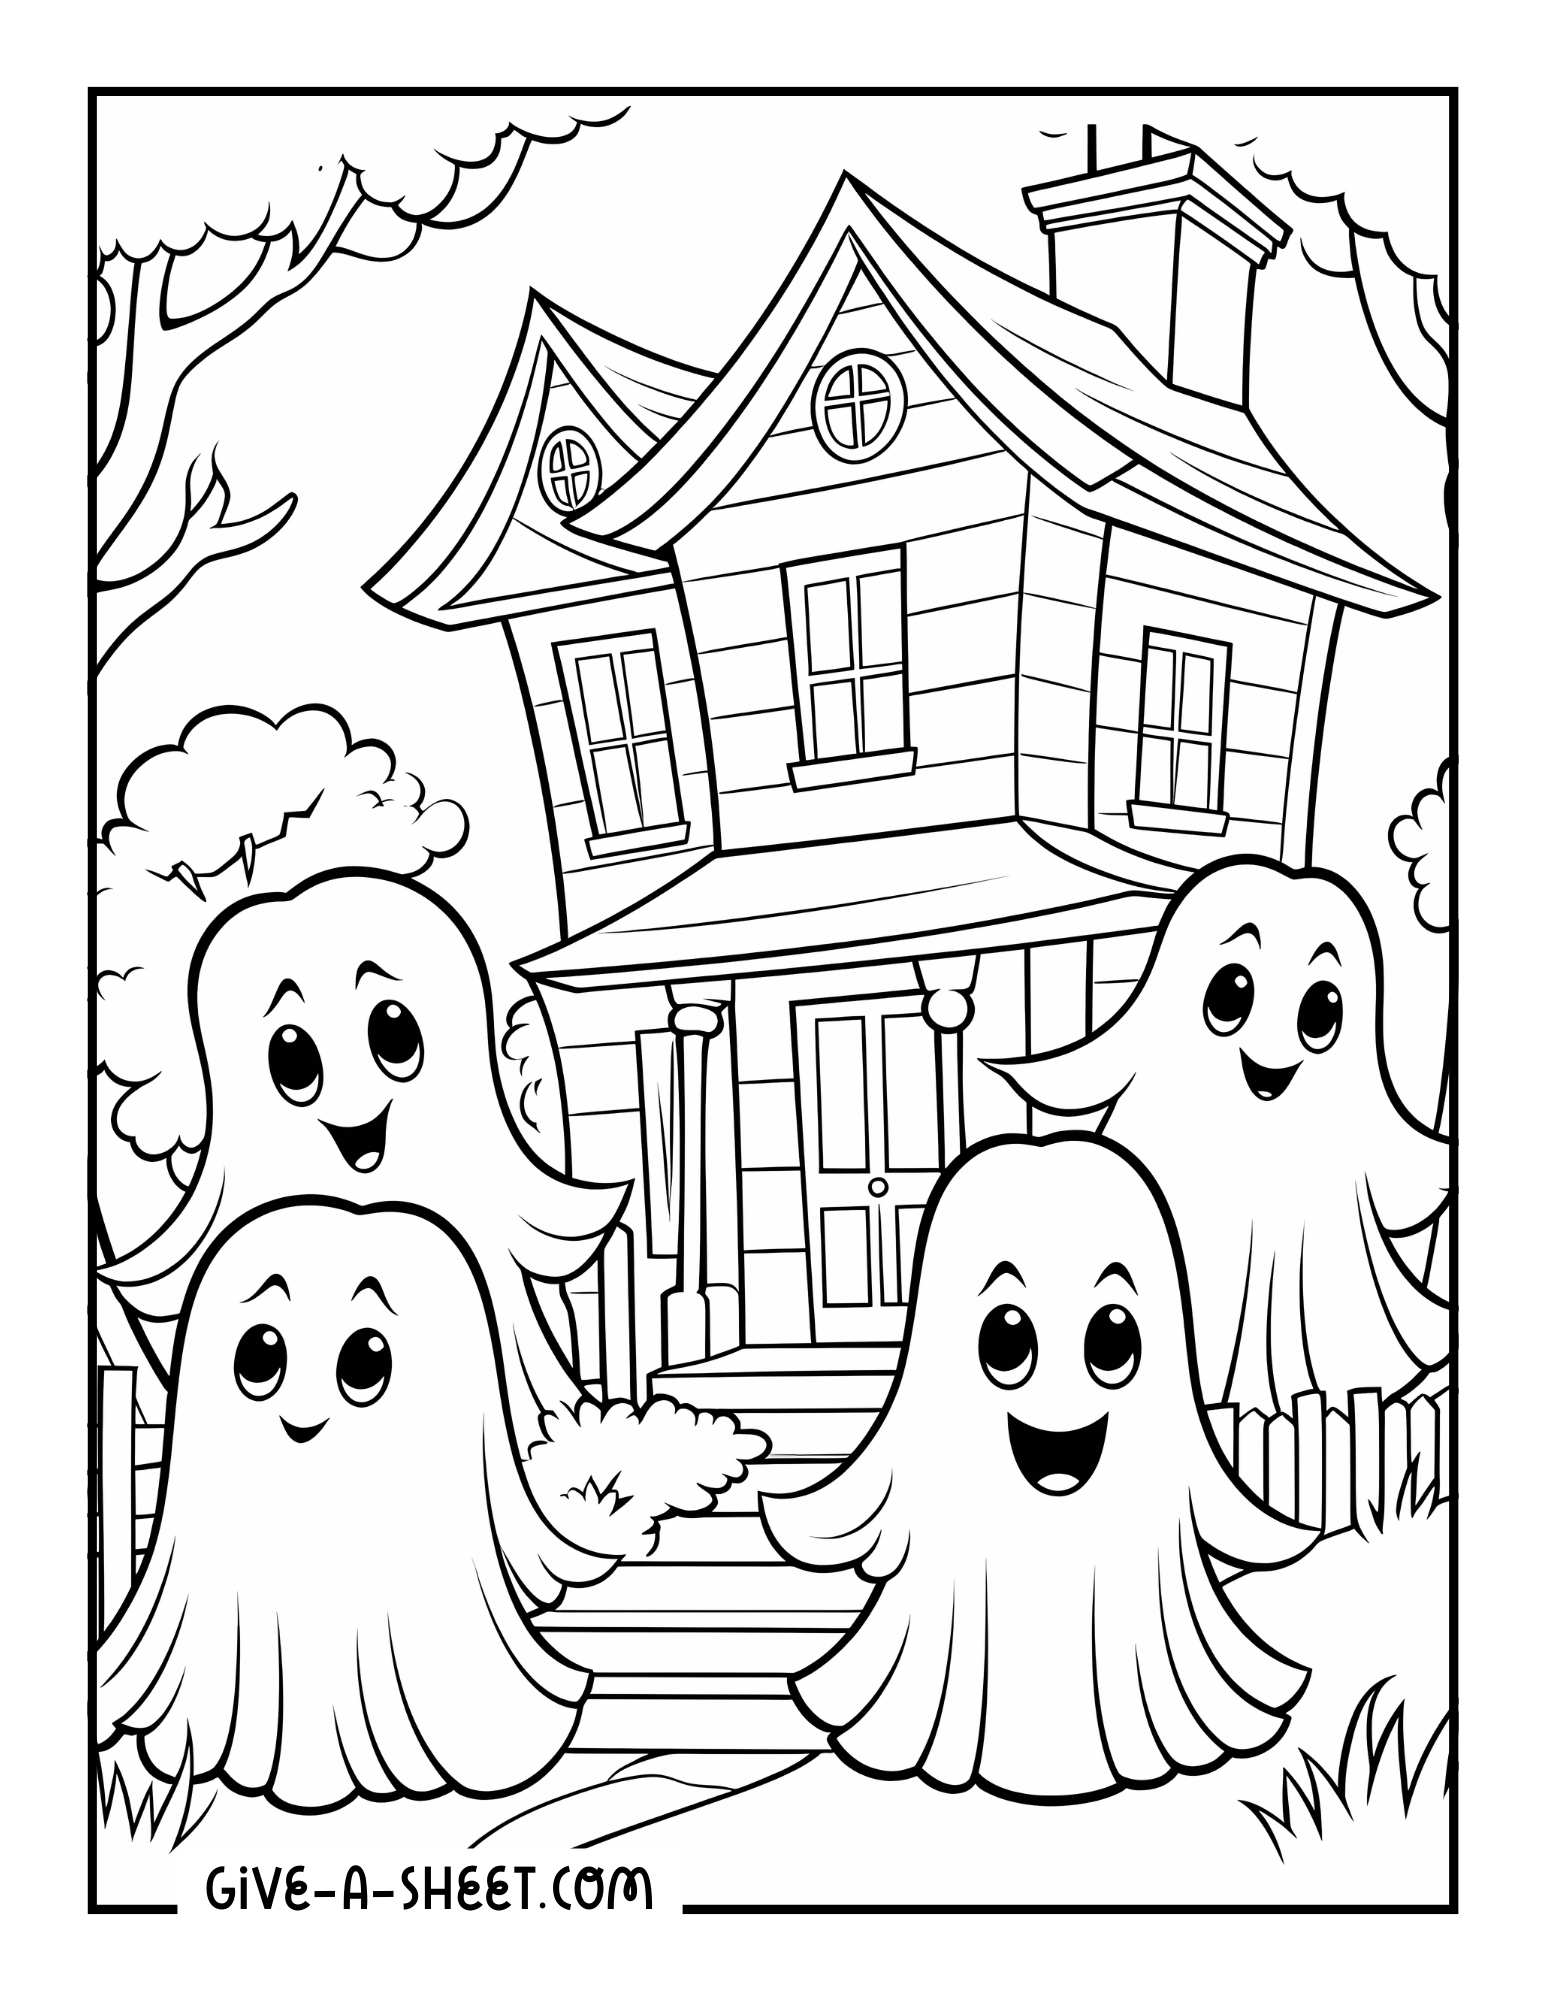 Spooky house with cute ghosts coloring sheet.